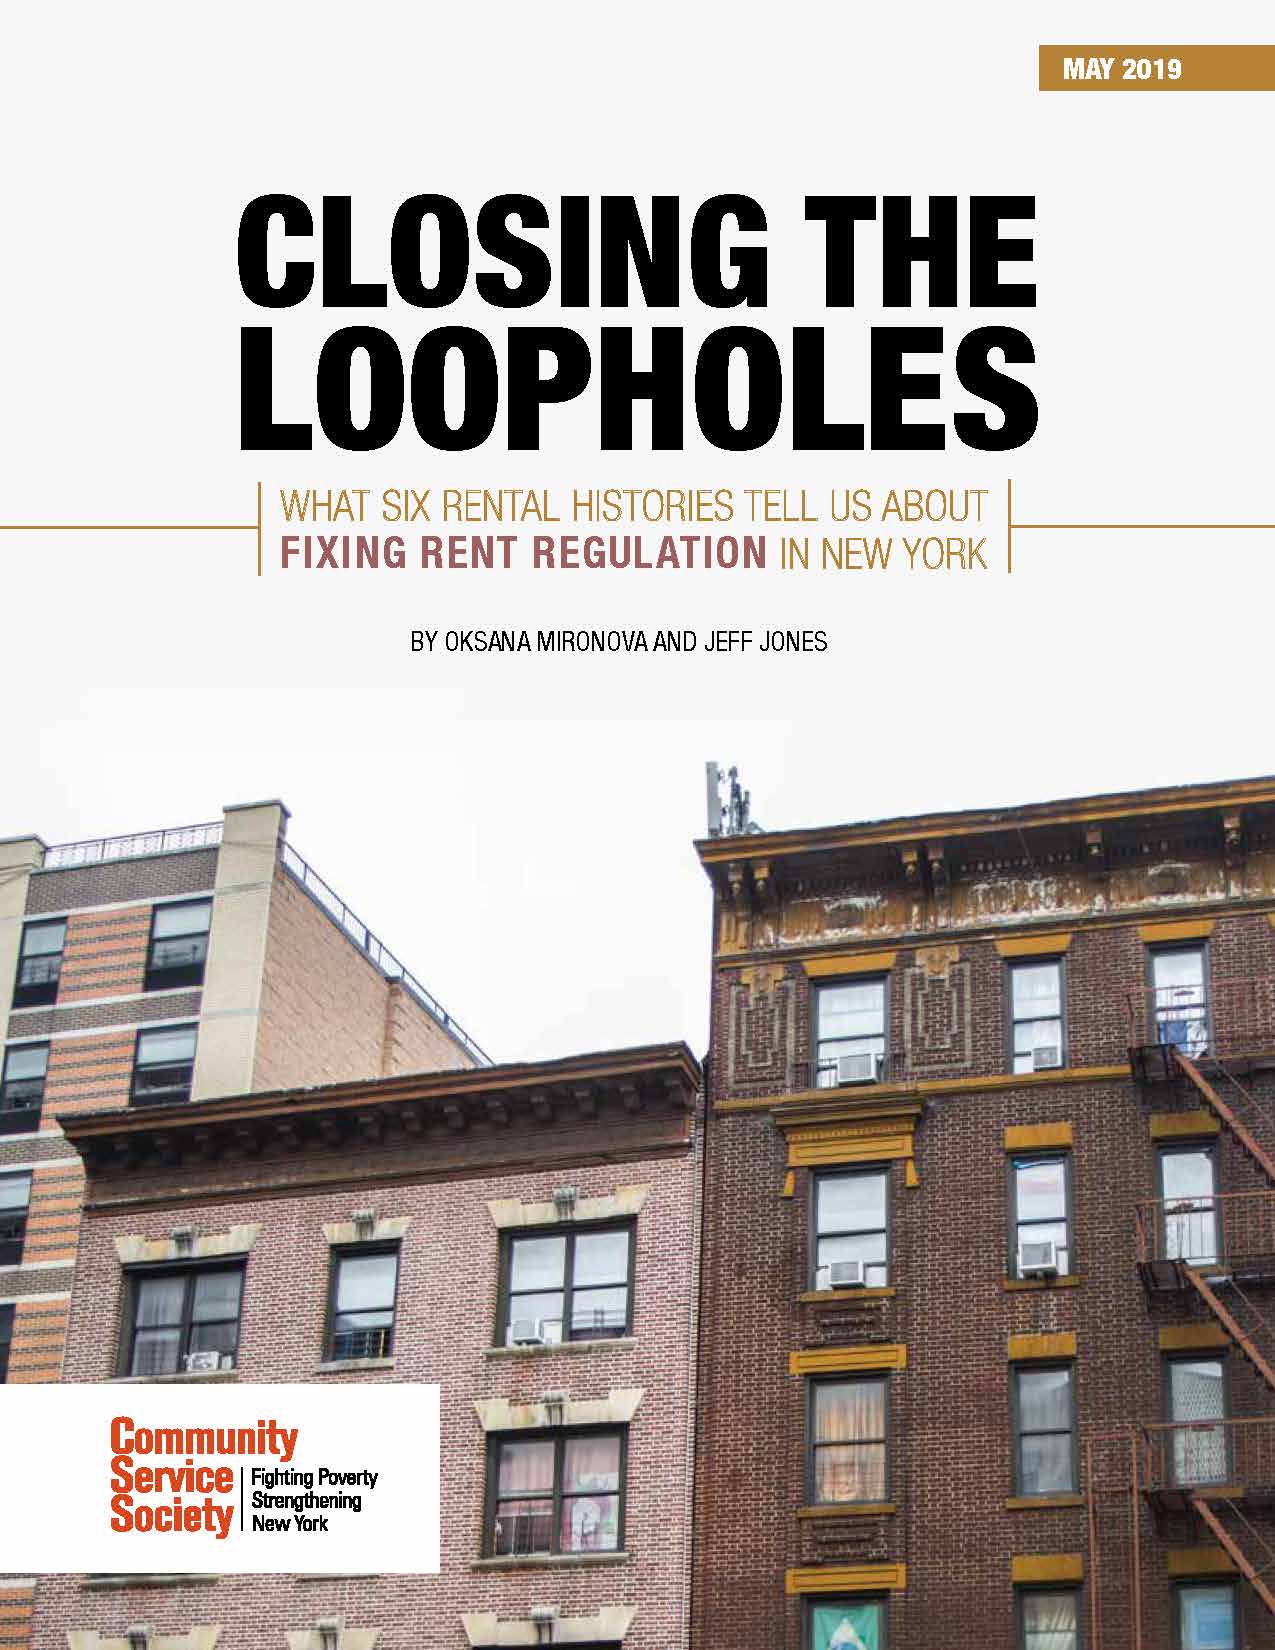 Closing the Loopholes: What Six Rental Histories Tell Us About Fixing Rent Regulation in New York